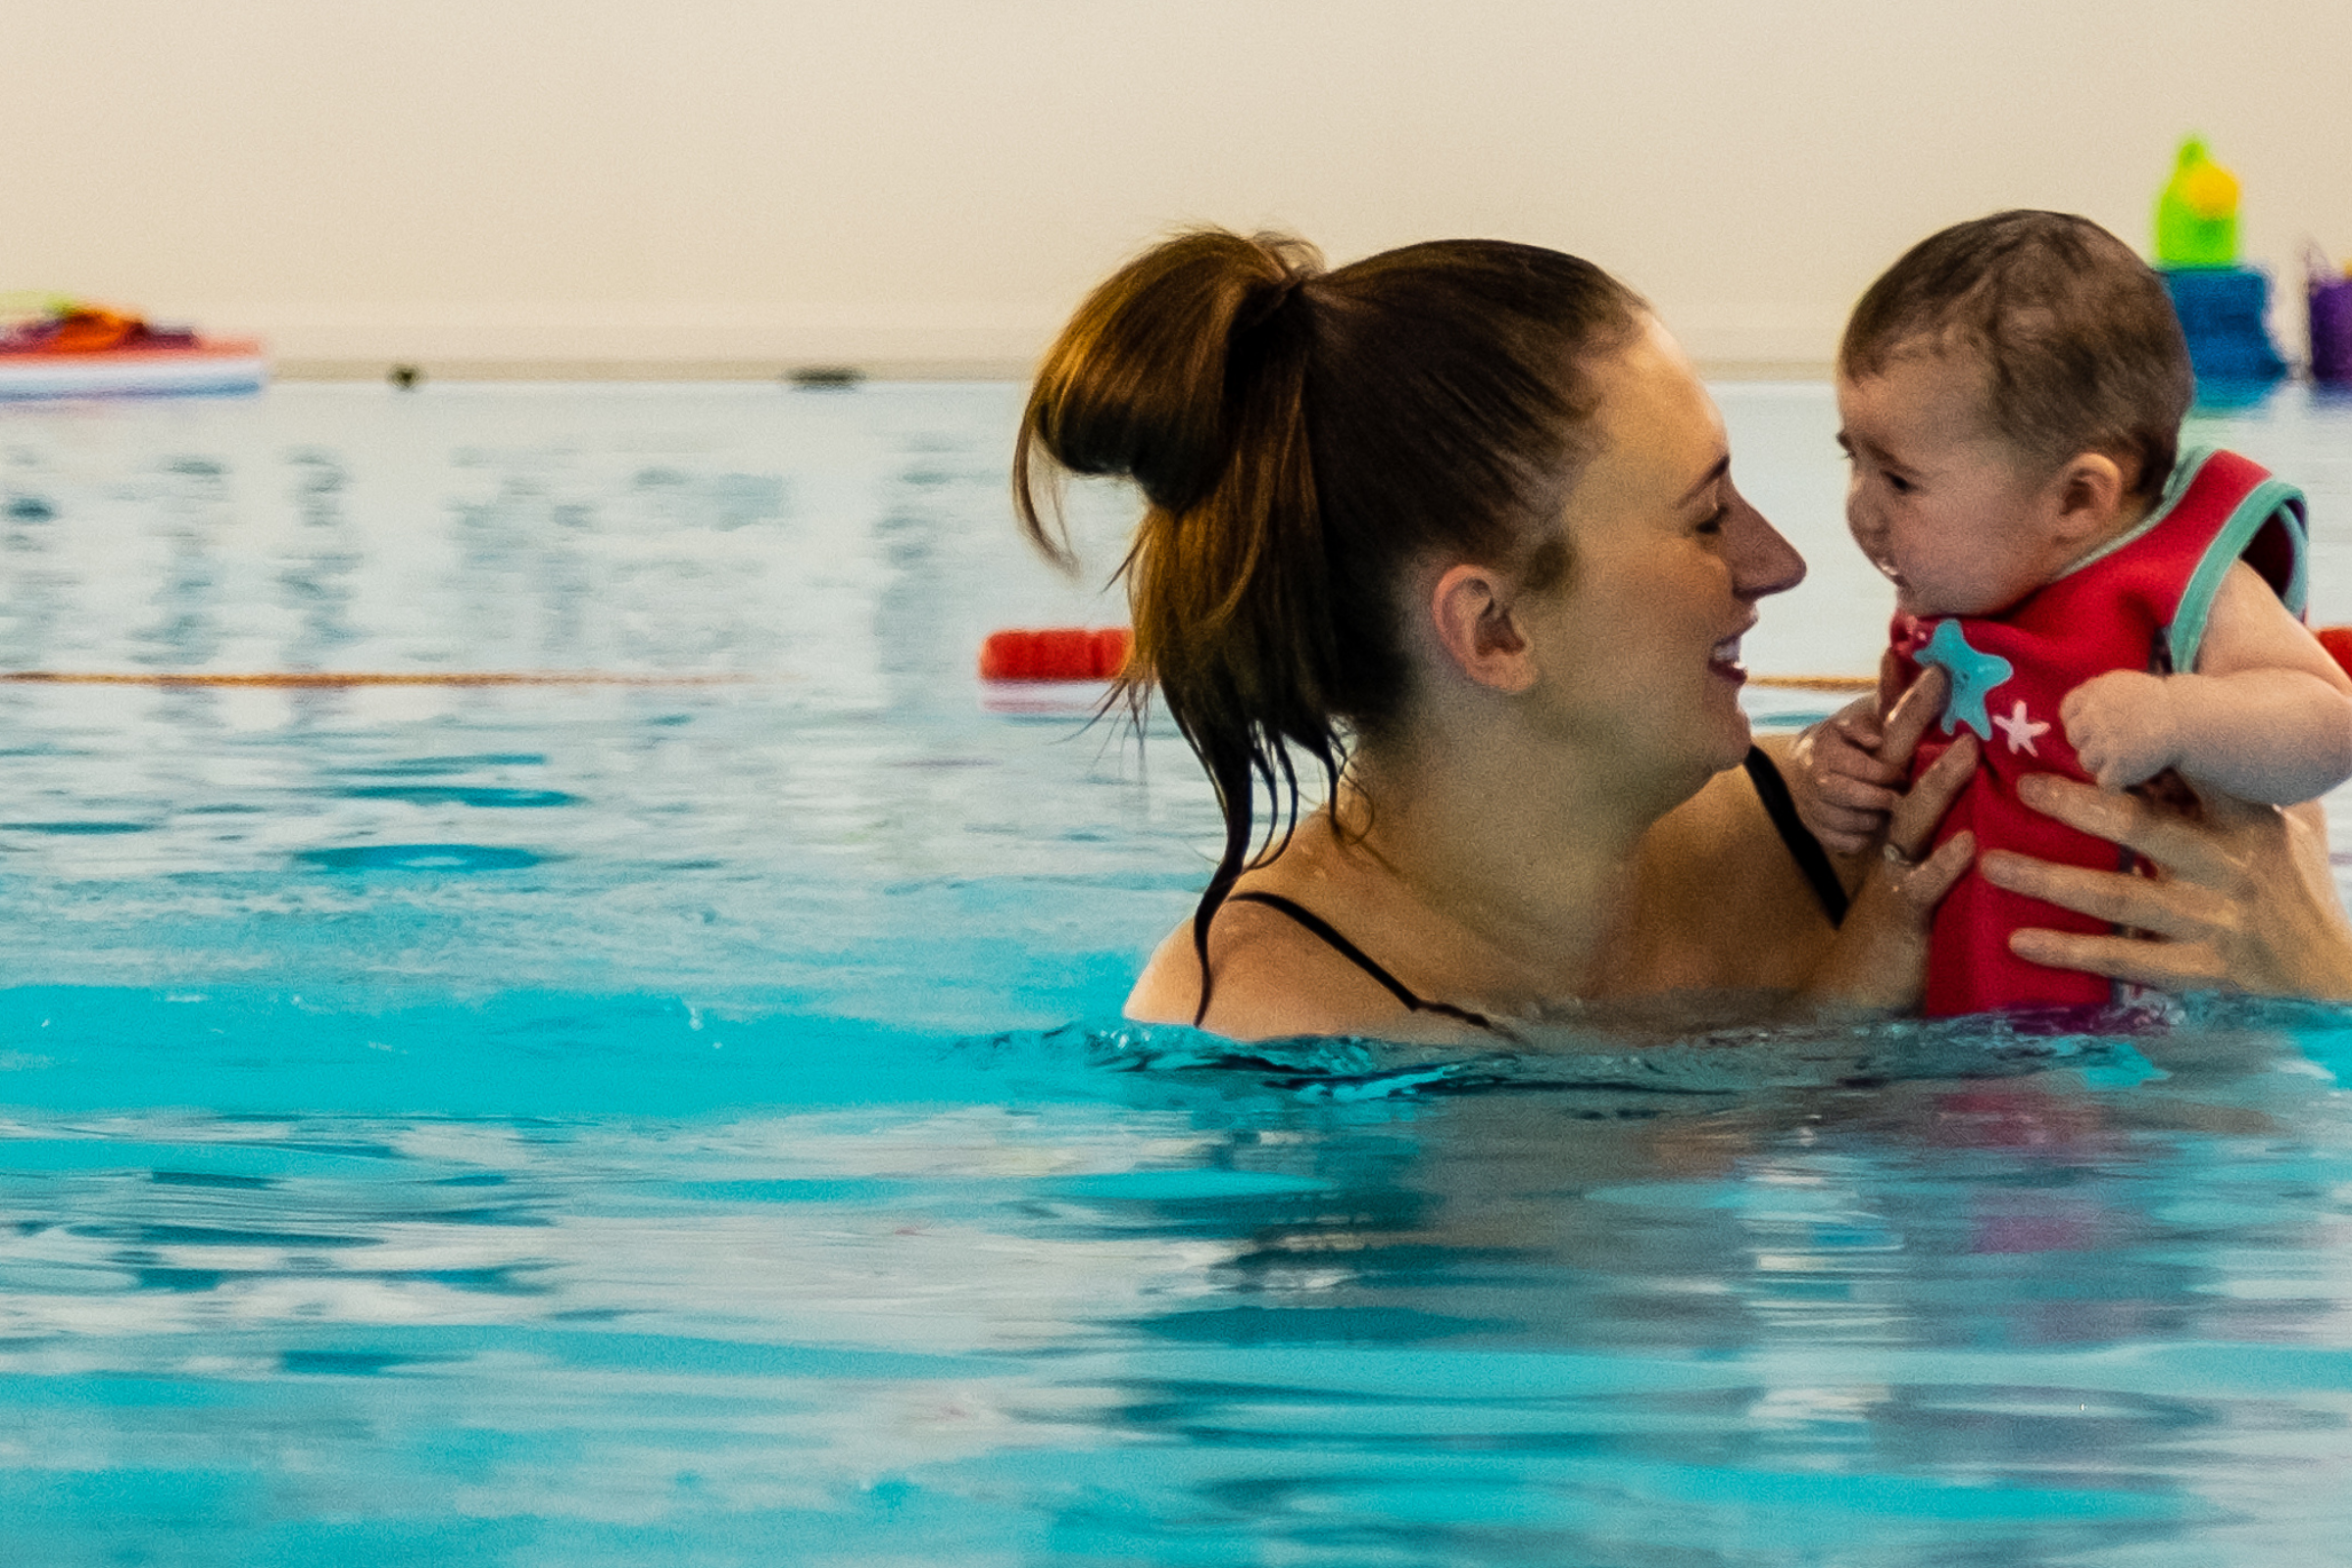 A mum and baby enjoy some quality bonding time during a baby swimming lesson